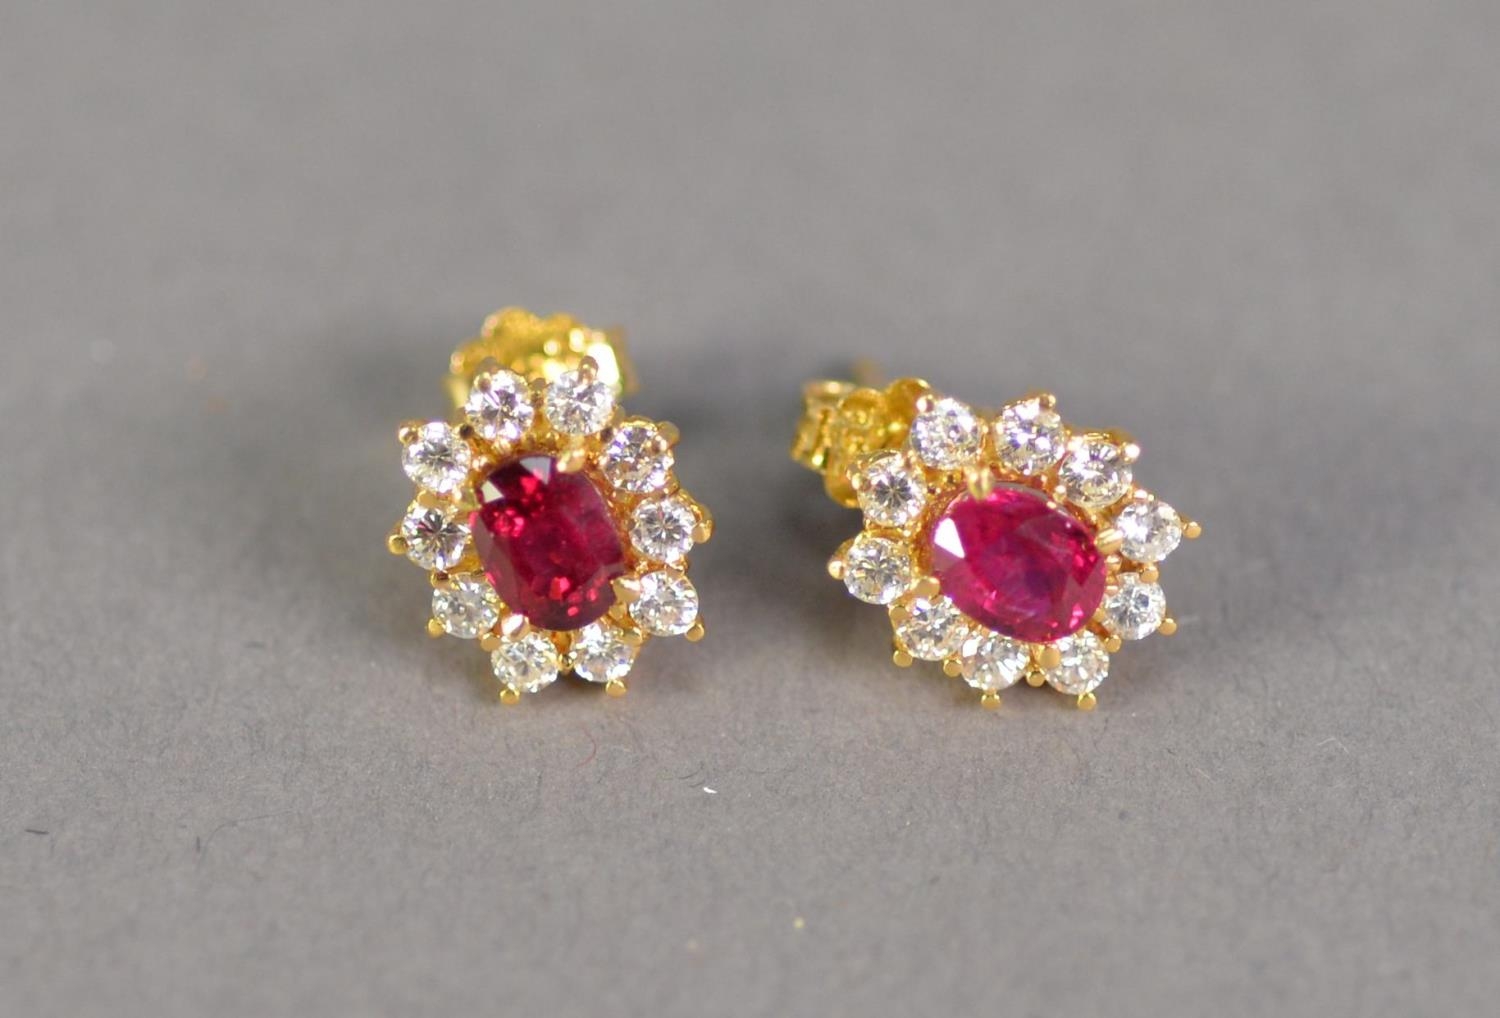 PAIR OF .750 STAMPED GOLD EARRINGS each set with a small ruby within a surround of ten tiny